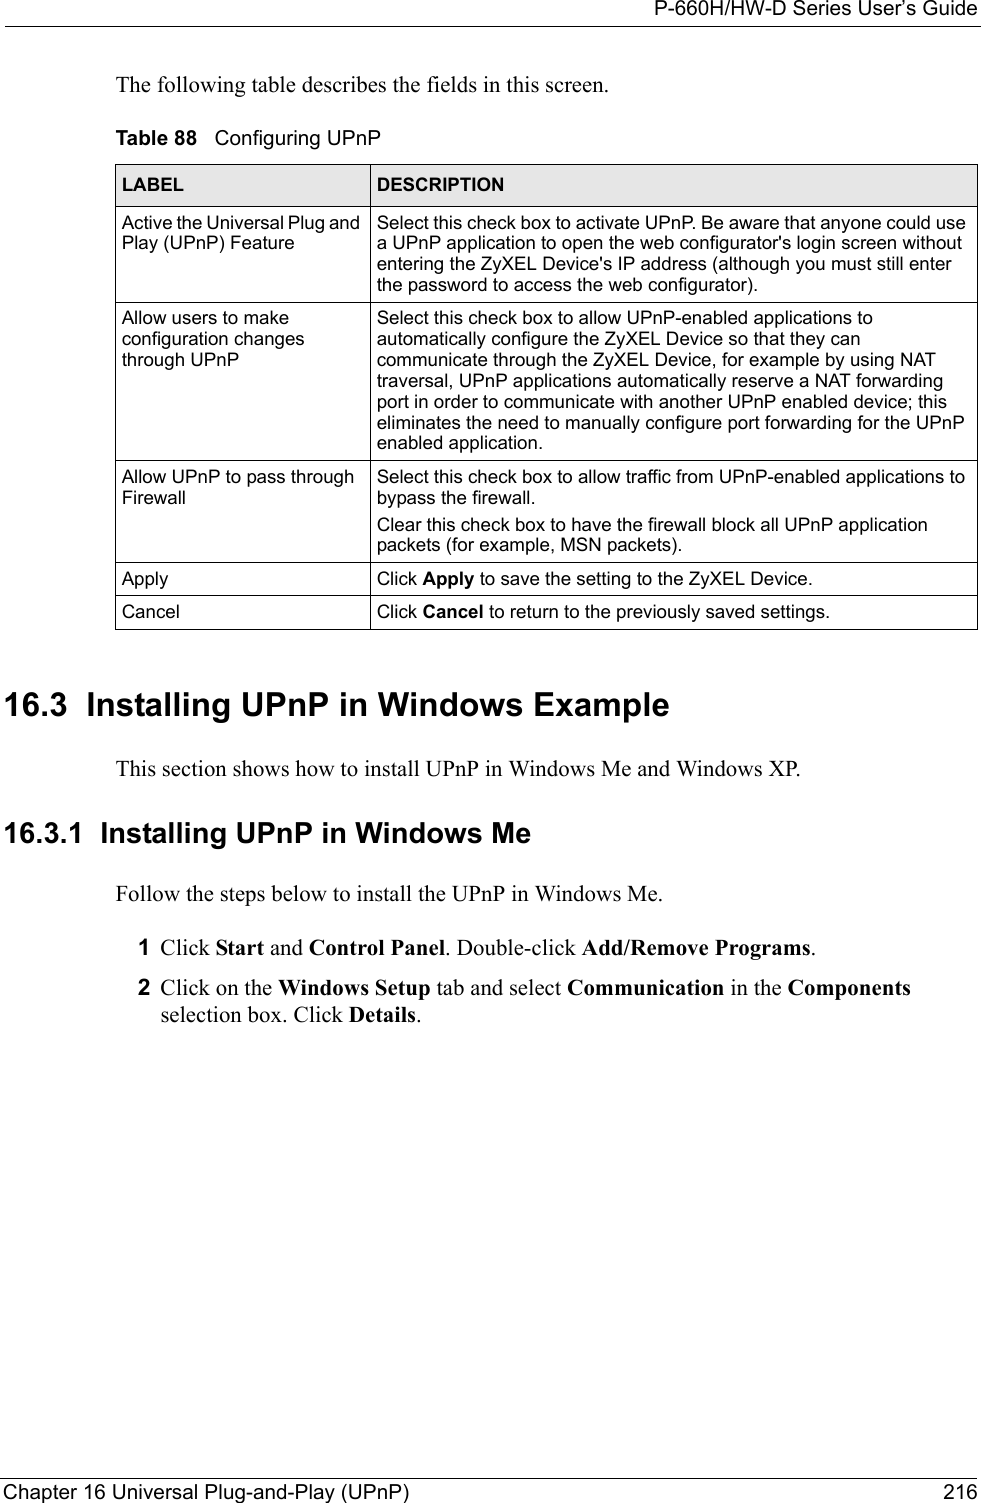 P-660H/HW-D Series User’s GuideChapter 16 Universal Plug-and-Play (UPnP) 216The following table describes the fields in this screen.16.3  Installing UPnP in Windows ExampleThis section shows how to install UPnP in Windows Me and Windows XP.  16.3.1  Installing UPnP in Windows MeFollow the steps below to install the UPnP in Windows Me. 1Click Start and Control Panel. Double-click Add/Remove Programs.2Click on the Windows Setup tab and select Communication in the Components selection box. Click Details.  Table 88   Configuring UPnPLABEL DESCRIPTIONActive the Universal Plug and Play (UPnP) Feature Select this check box to activate UPnP. Be aware that anyone could use a UPnP application to open the web configurator&apos;s login screen without entering the ZyXEL Device&apos;s IP address (although you must still enter the password to access the web configurator).Allow users to make configuration changes through UPnPSelect this check box to allow UPnP-enabled applications to automatically configure the ZyXEL Device so that they can communicate through the ZyXEL Device, for example by using NAT traversal, UPnP applications automatically reserve a NAT forwarding port in order to communicate with another UPnP enabled device; this eliminates the need to manually configure port forwarding for the UPnP enabled application. Allow UPnP to pass through FirewallSelect this check box to allow traffic from UPnP-enabled applications to bypass the firewall. Clear this check box to have the firewall block all UPnP application packets (for example, MSN packets). Apply Click Apply to save the setting to the ZyXEL Device.Cancel Click Cancel to return to the previously saved settings.